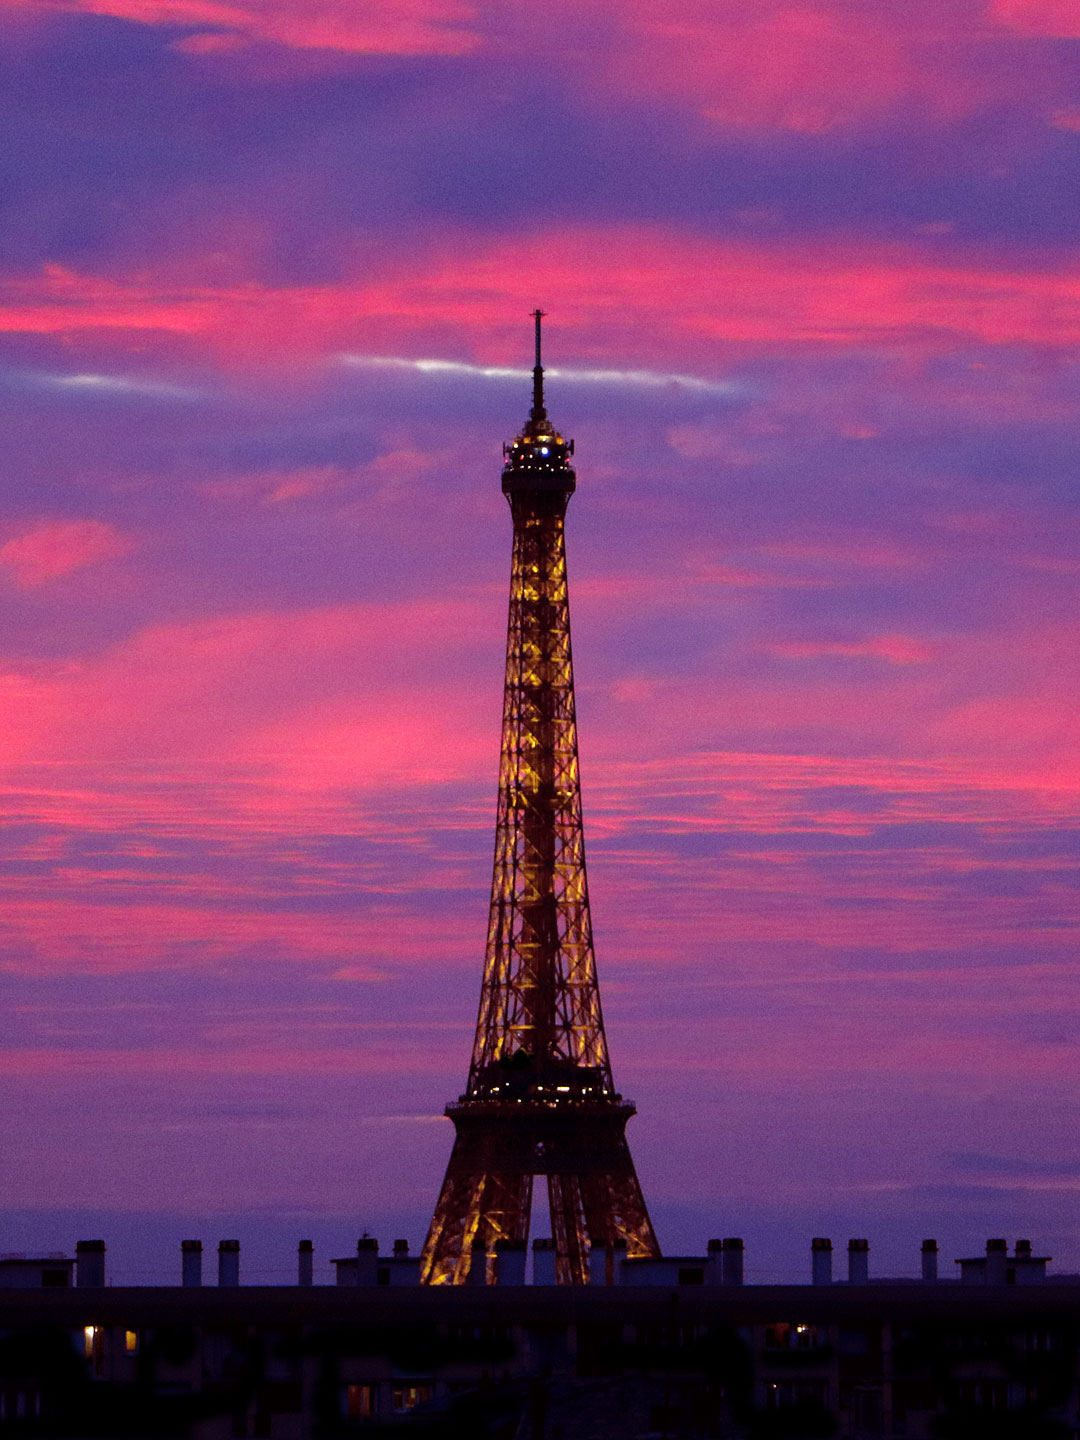 French Photographer Paris France Landscape Photography Pink Sunset at Eiffel Tower